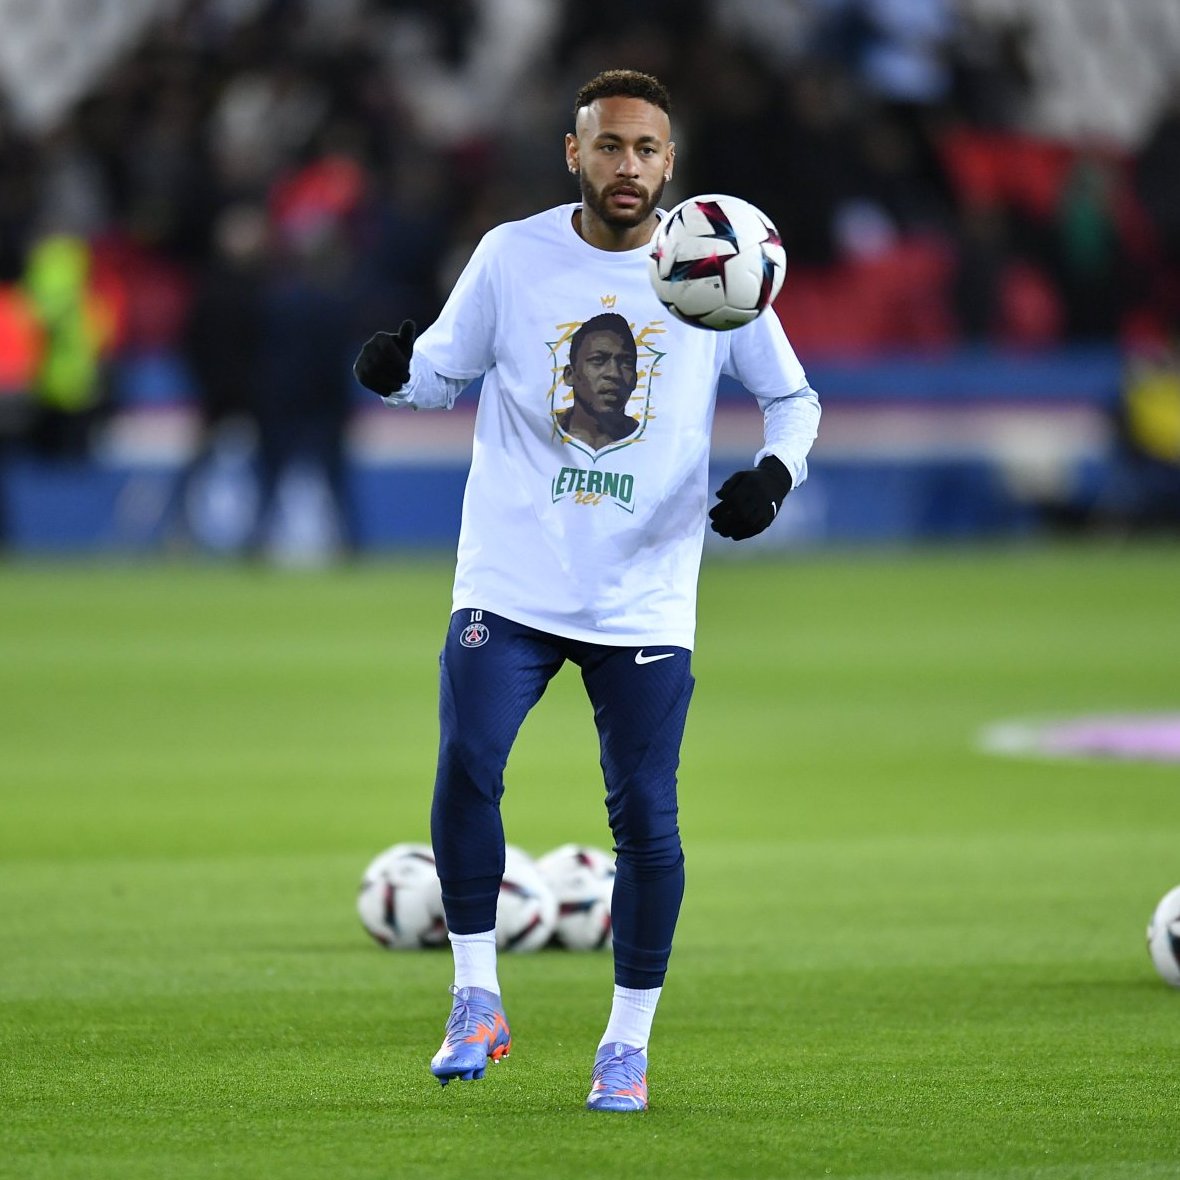 Football Tweet ⚽ Twitter: "Messi and Neymar are wearing shirt in the warm-up in tribute to Pele. ❤️ https://t.co/Vi6D3VP1ao" / Twitter